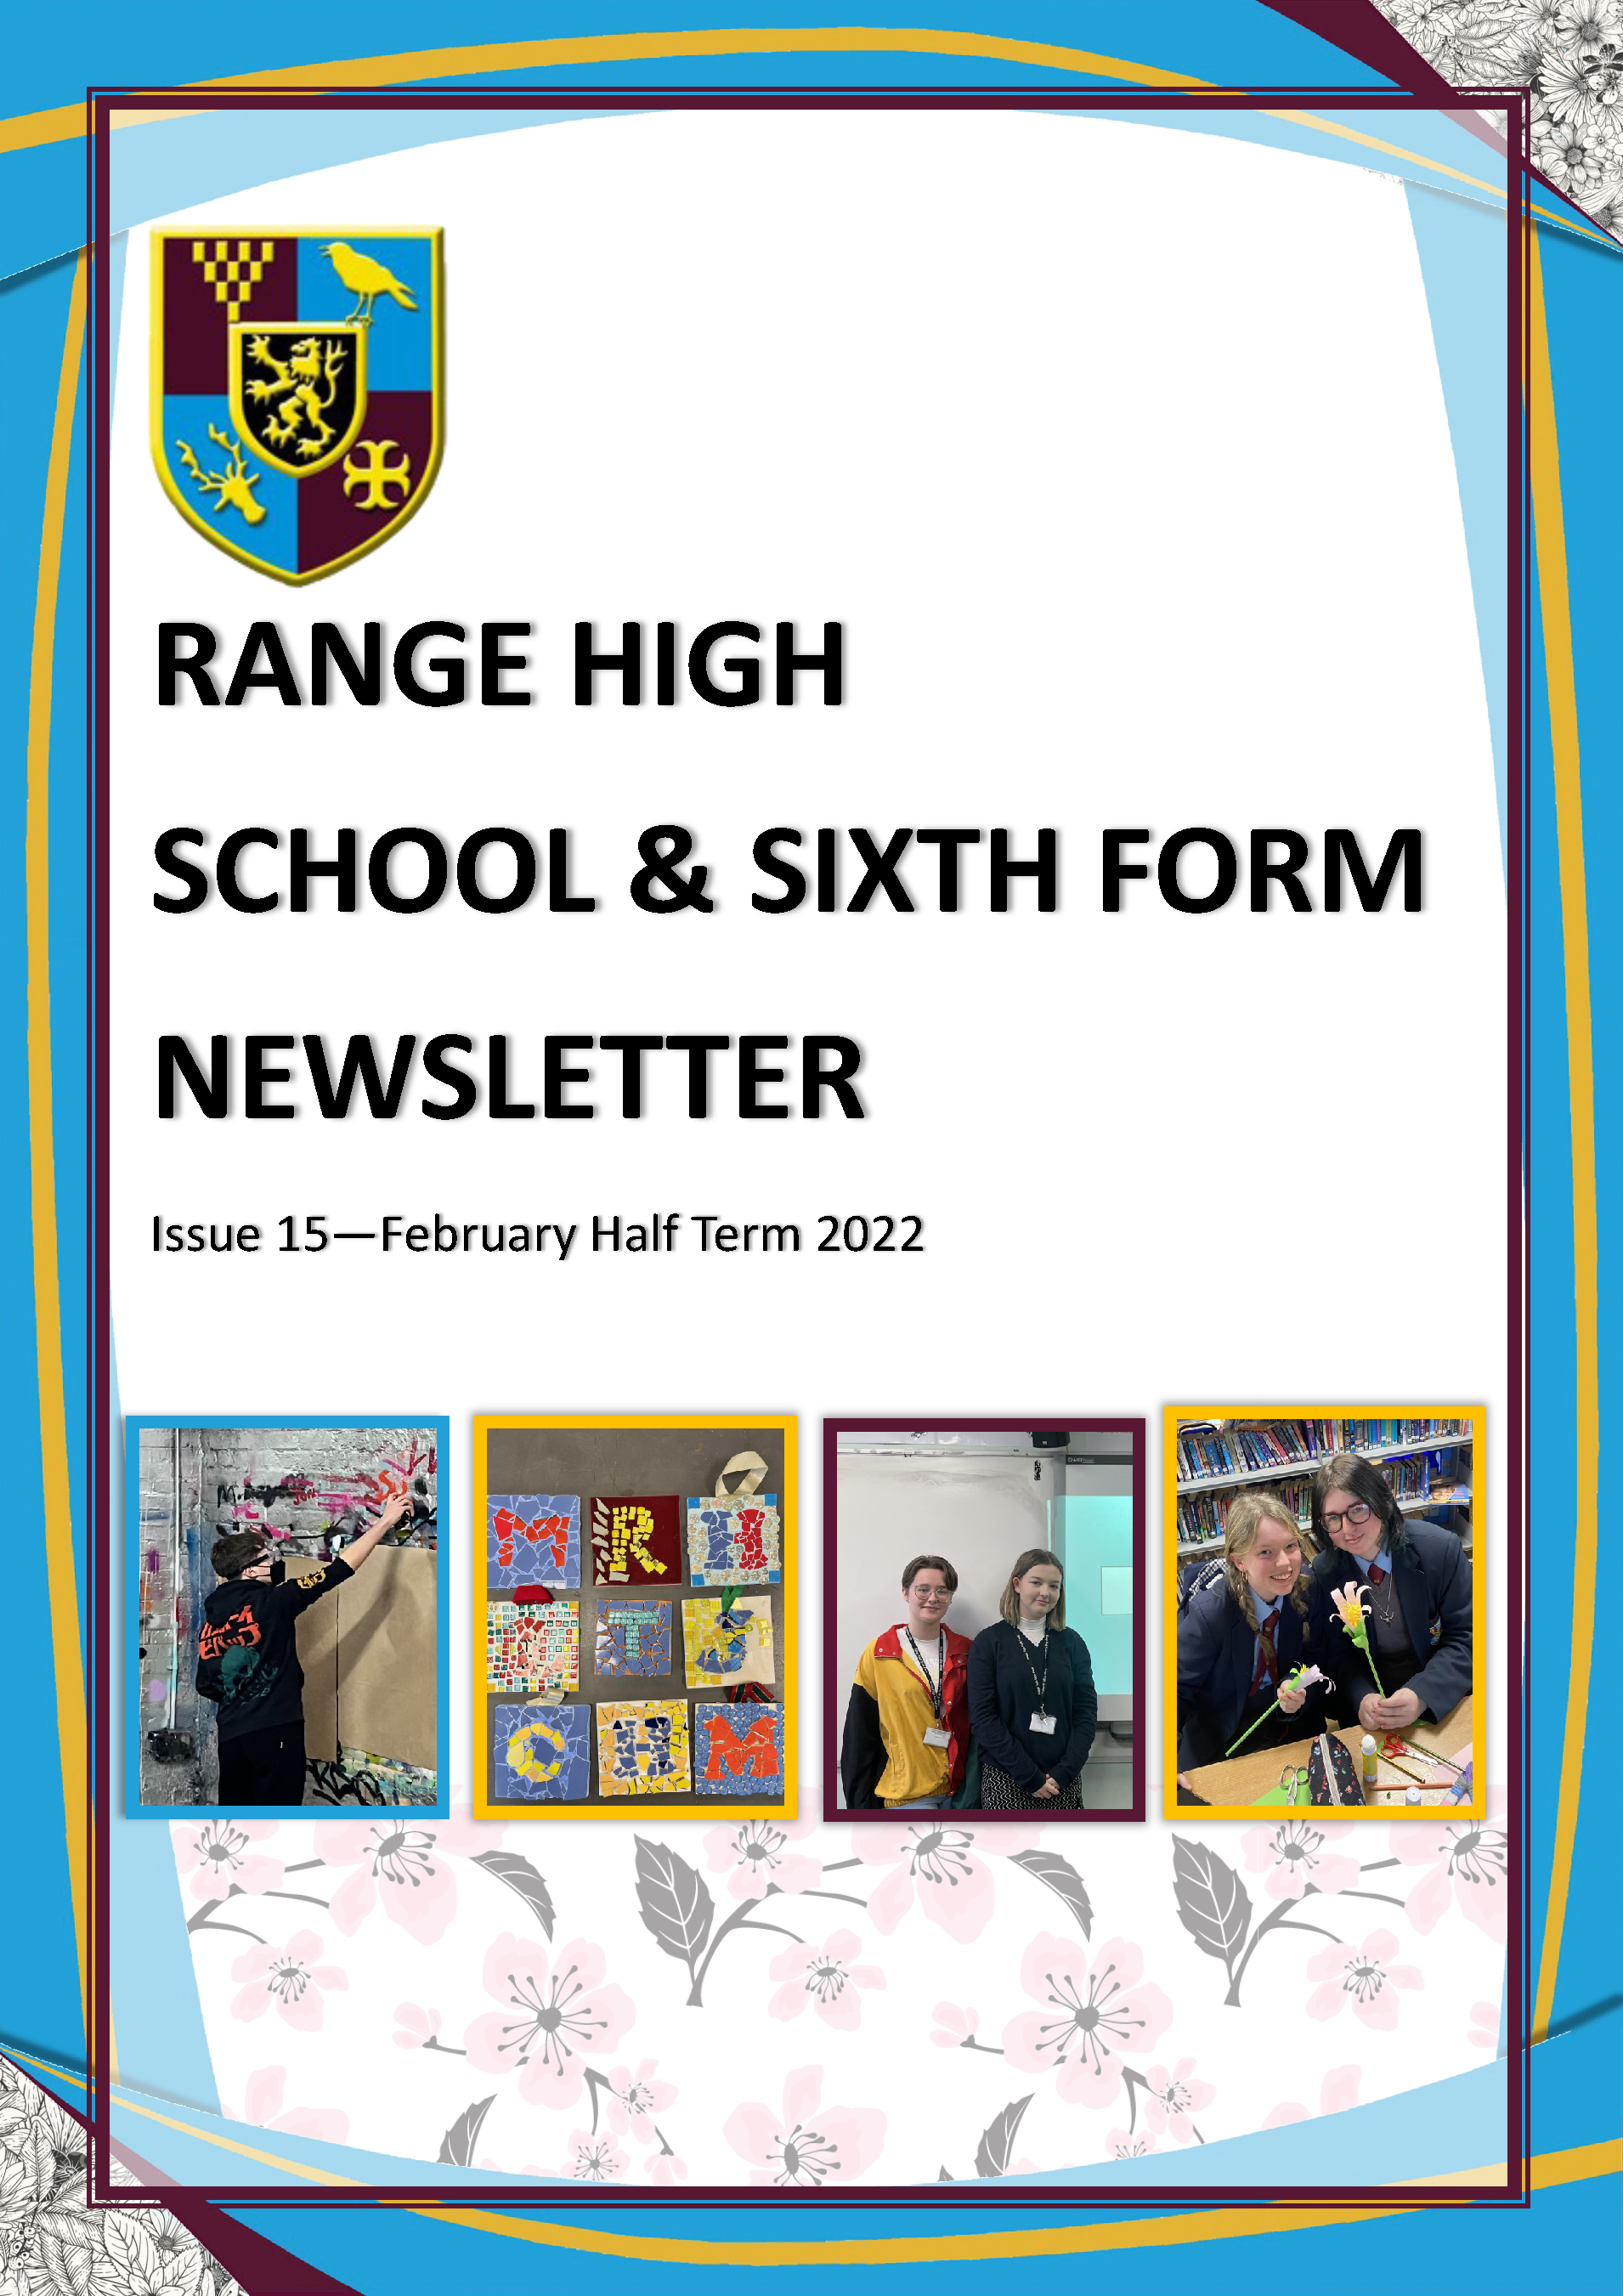 http://www.range.sefton.sch.uk/wp-content/uploads/2022/02/Newsletter-February-2022_Page_01-1.png